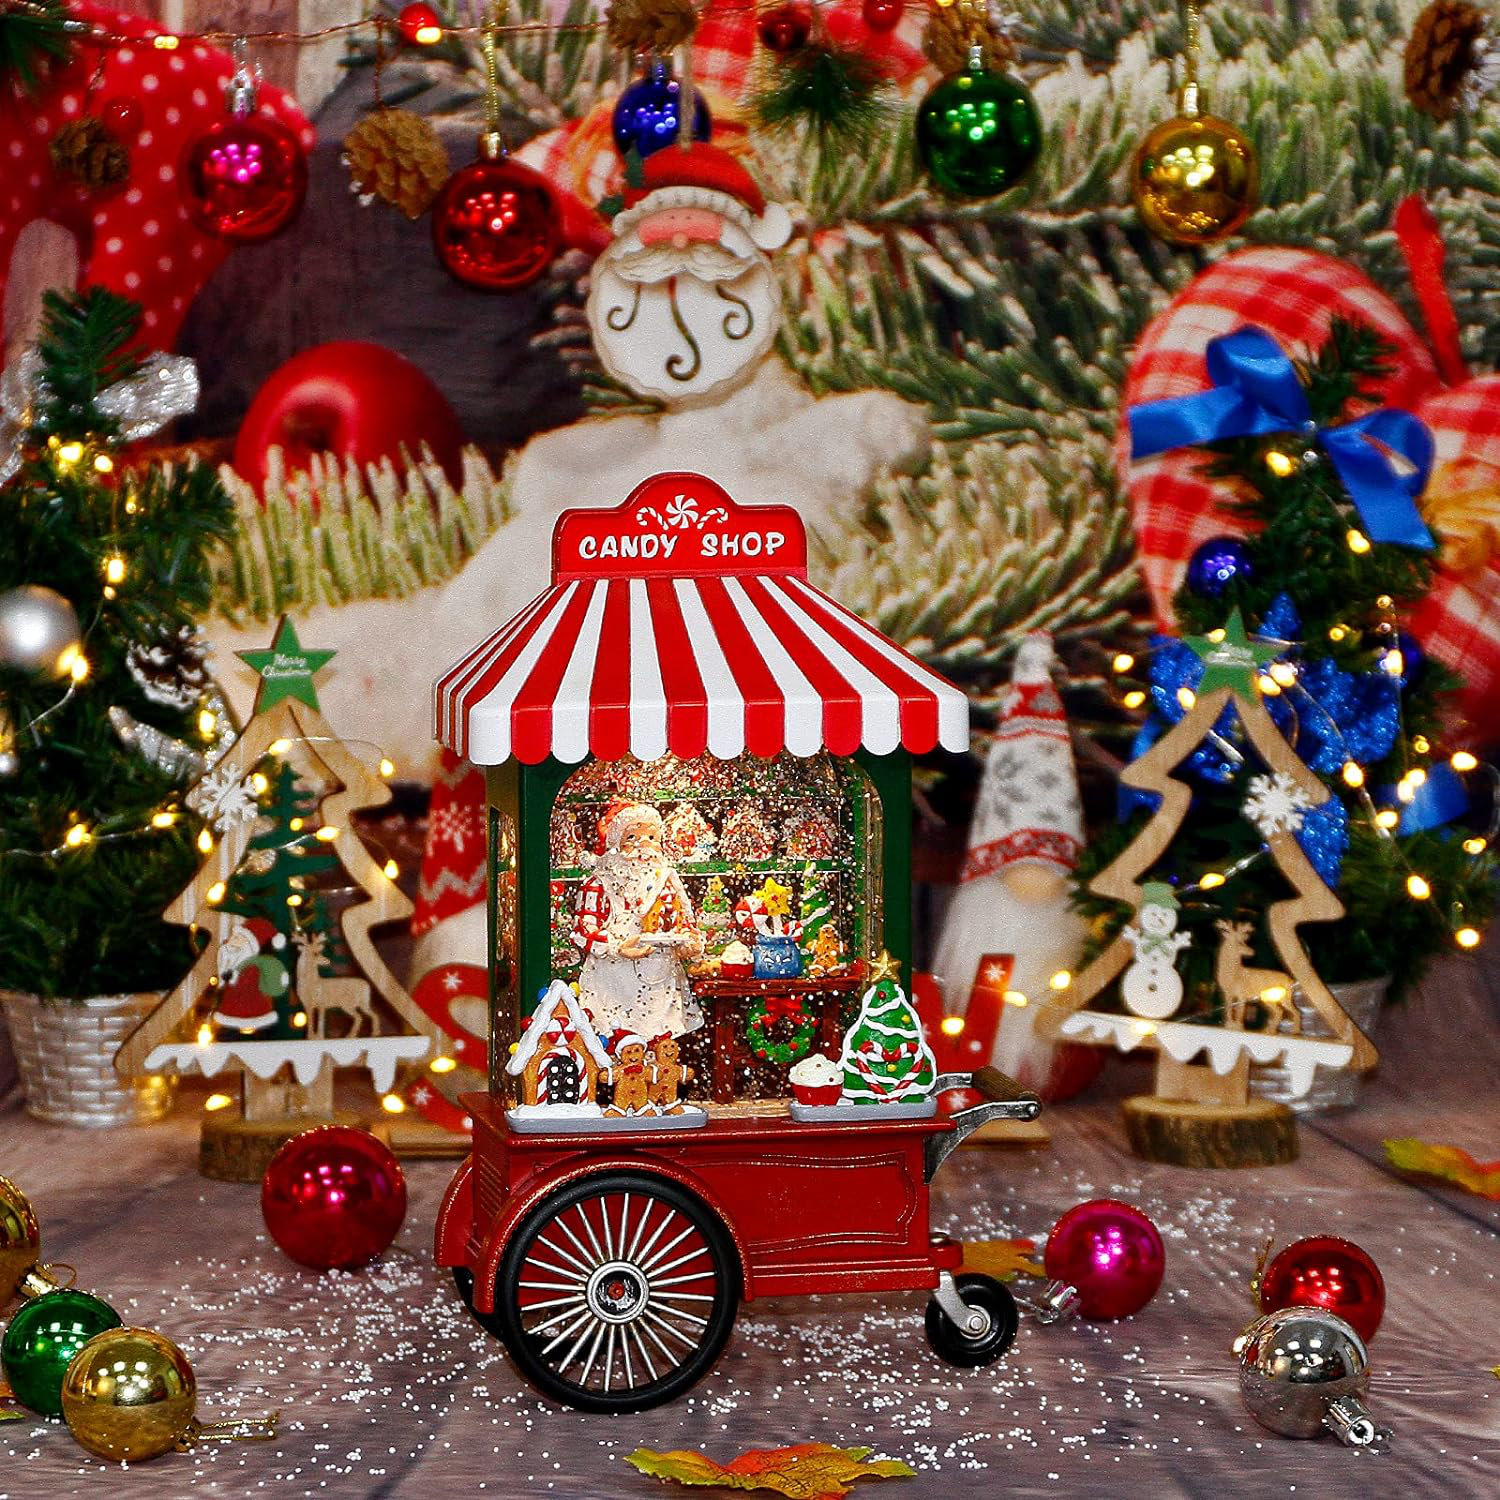 Snow Globe Figurines, Christmas Decorations for Christmas Party